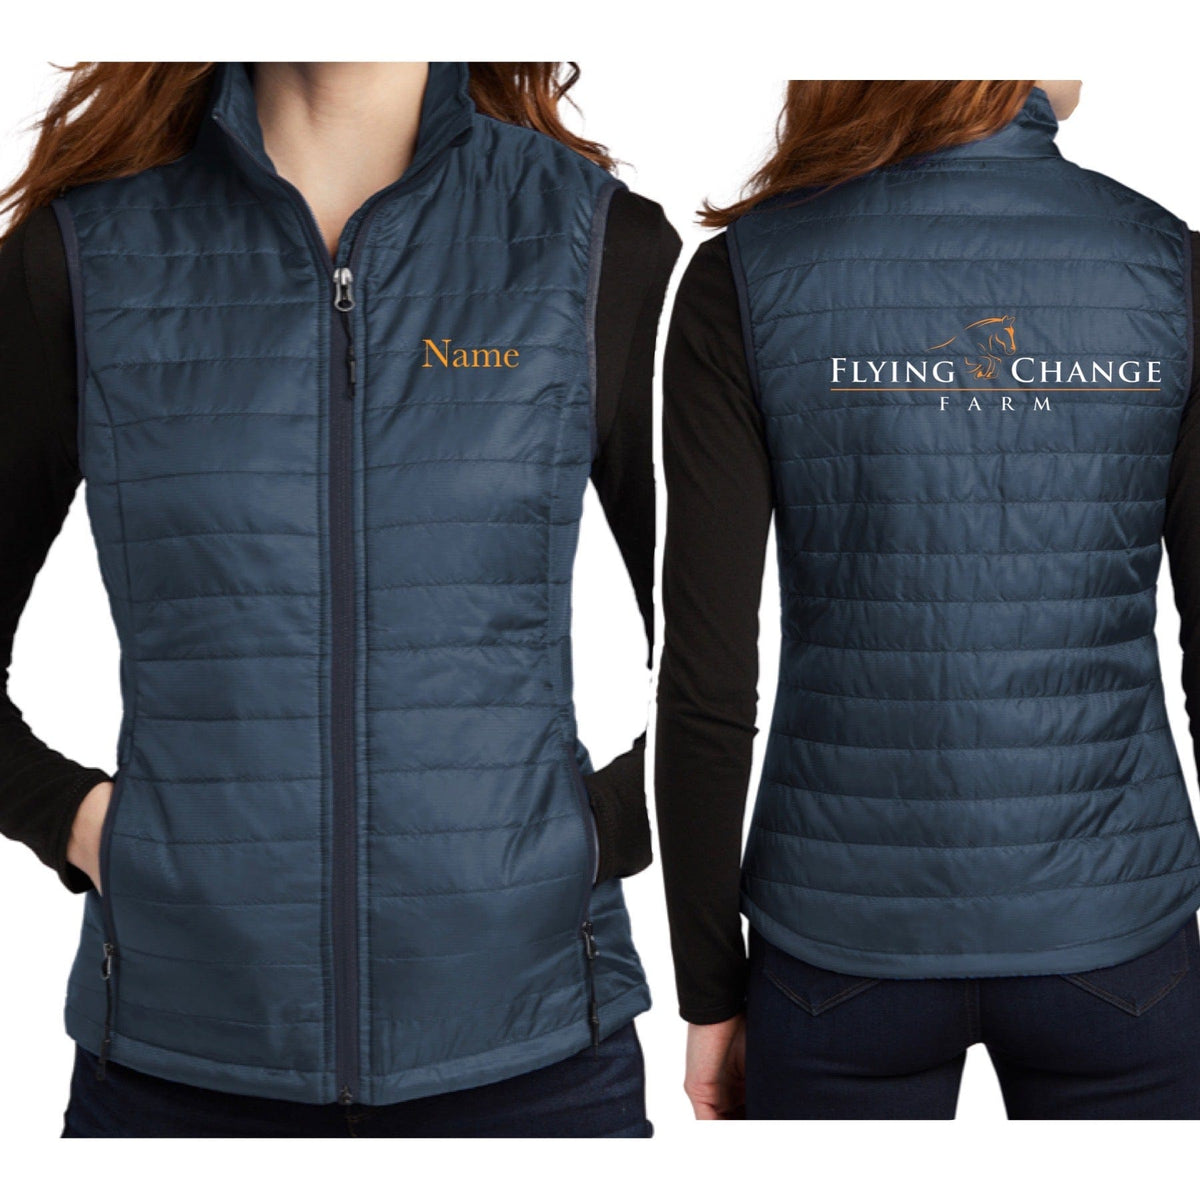 Equestrian Team Apparel Flying Change Farm Puffy Vest and Jacket equestrian team apparel online tack store mobile tack store custom farm apparel custom show stable clothing equestrian lifestyle horse show clothing riding clothes horses equestrian tack store